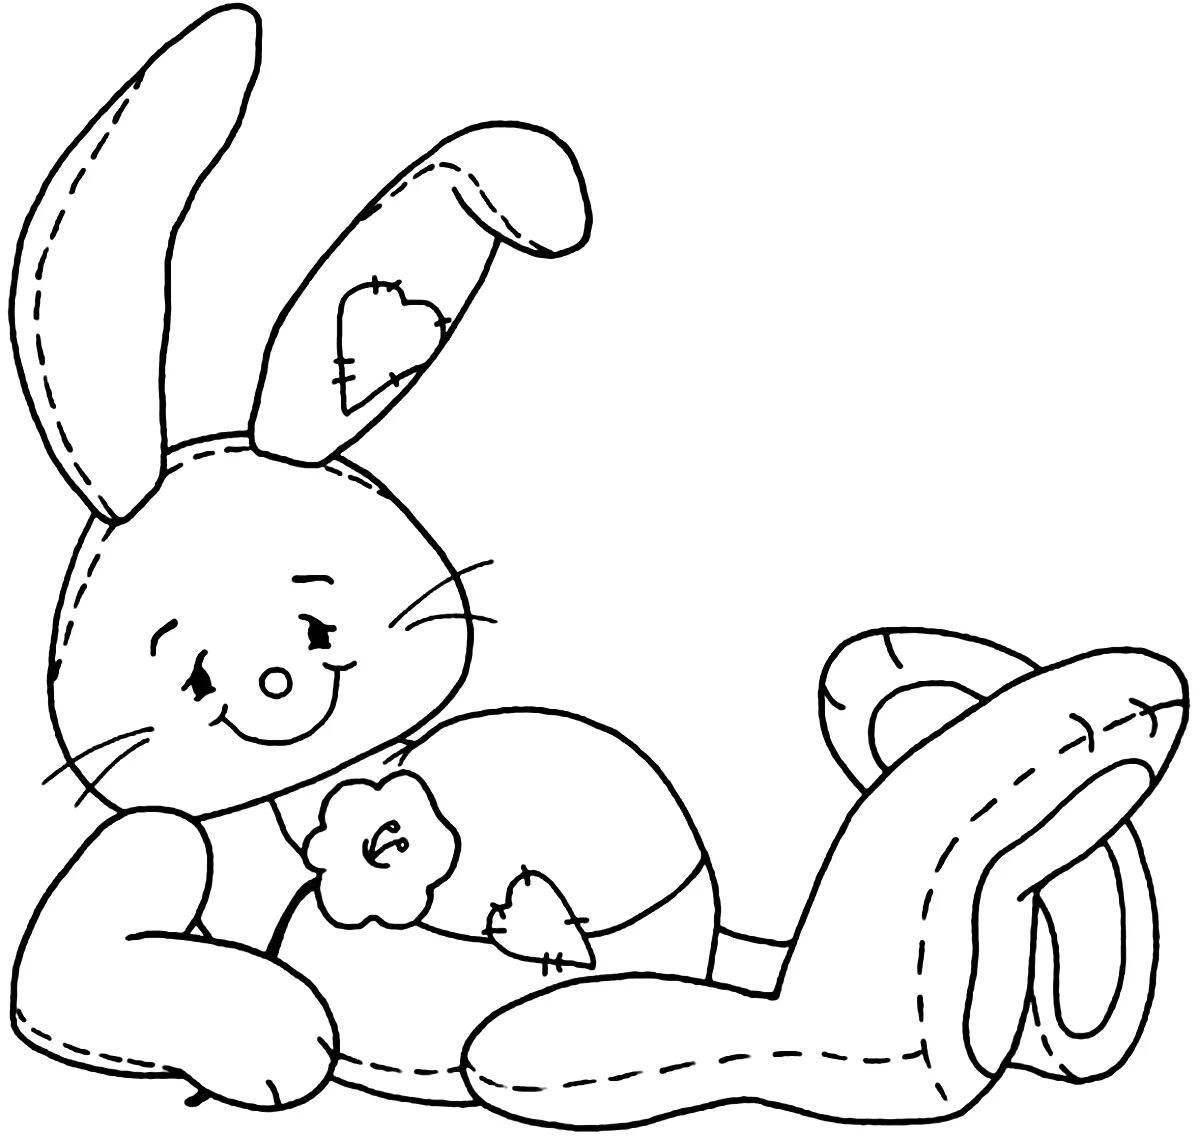 Fancy bunny toy coloring book